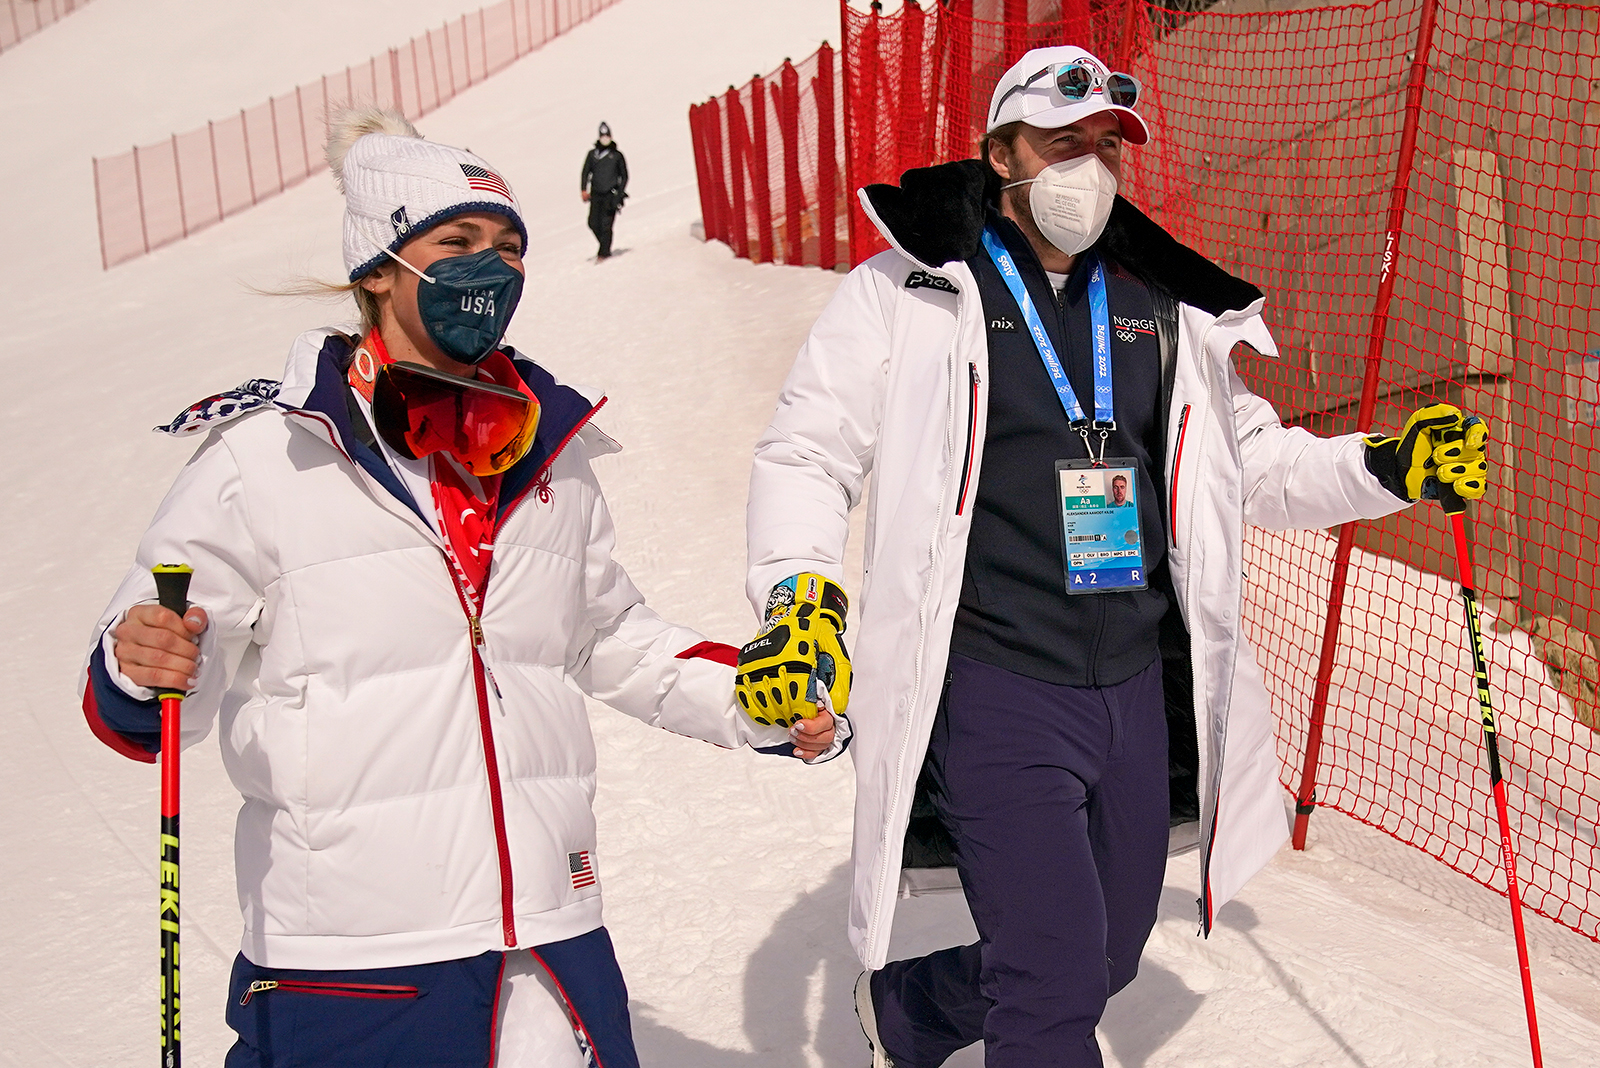 Norway's Aleksander Aamodt Kilde, right, and his girlfriend, Team USA's Mikaela Shiffrin, leave the finish area for the women's super-G on Feb. 11.